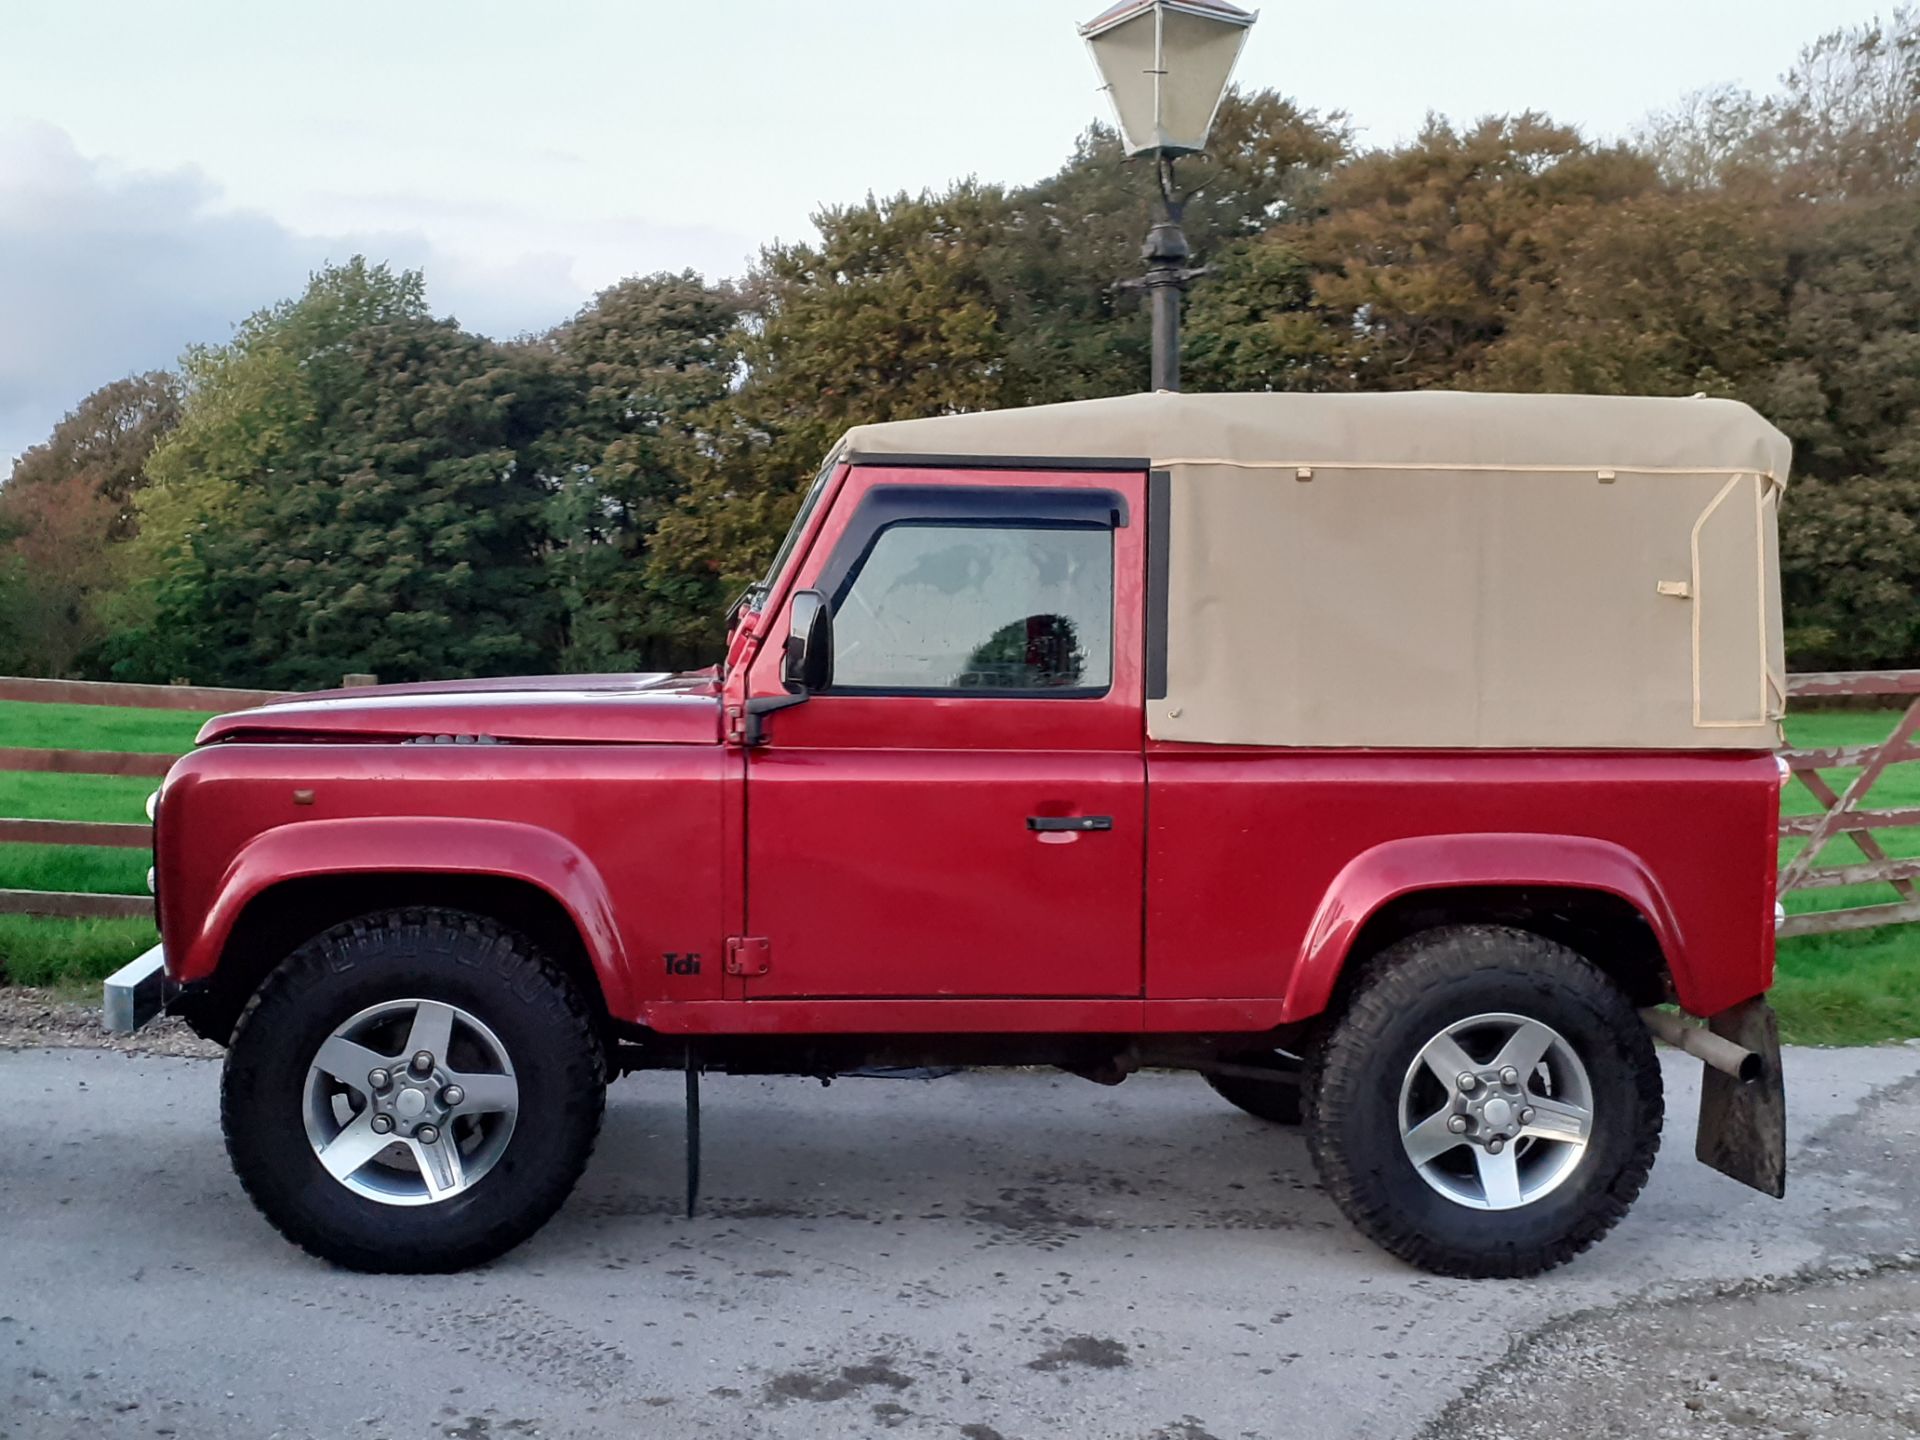 1998/R REG LAND ROVER DEFENDER 90 CSW TDI 95 RED CONVERTIBLE 6 SEATER, SHOWING 2 FORMER KEEPERS - Image 5 of 9